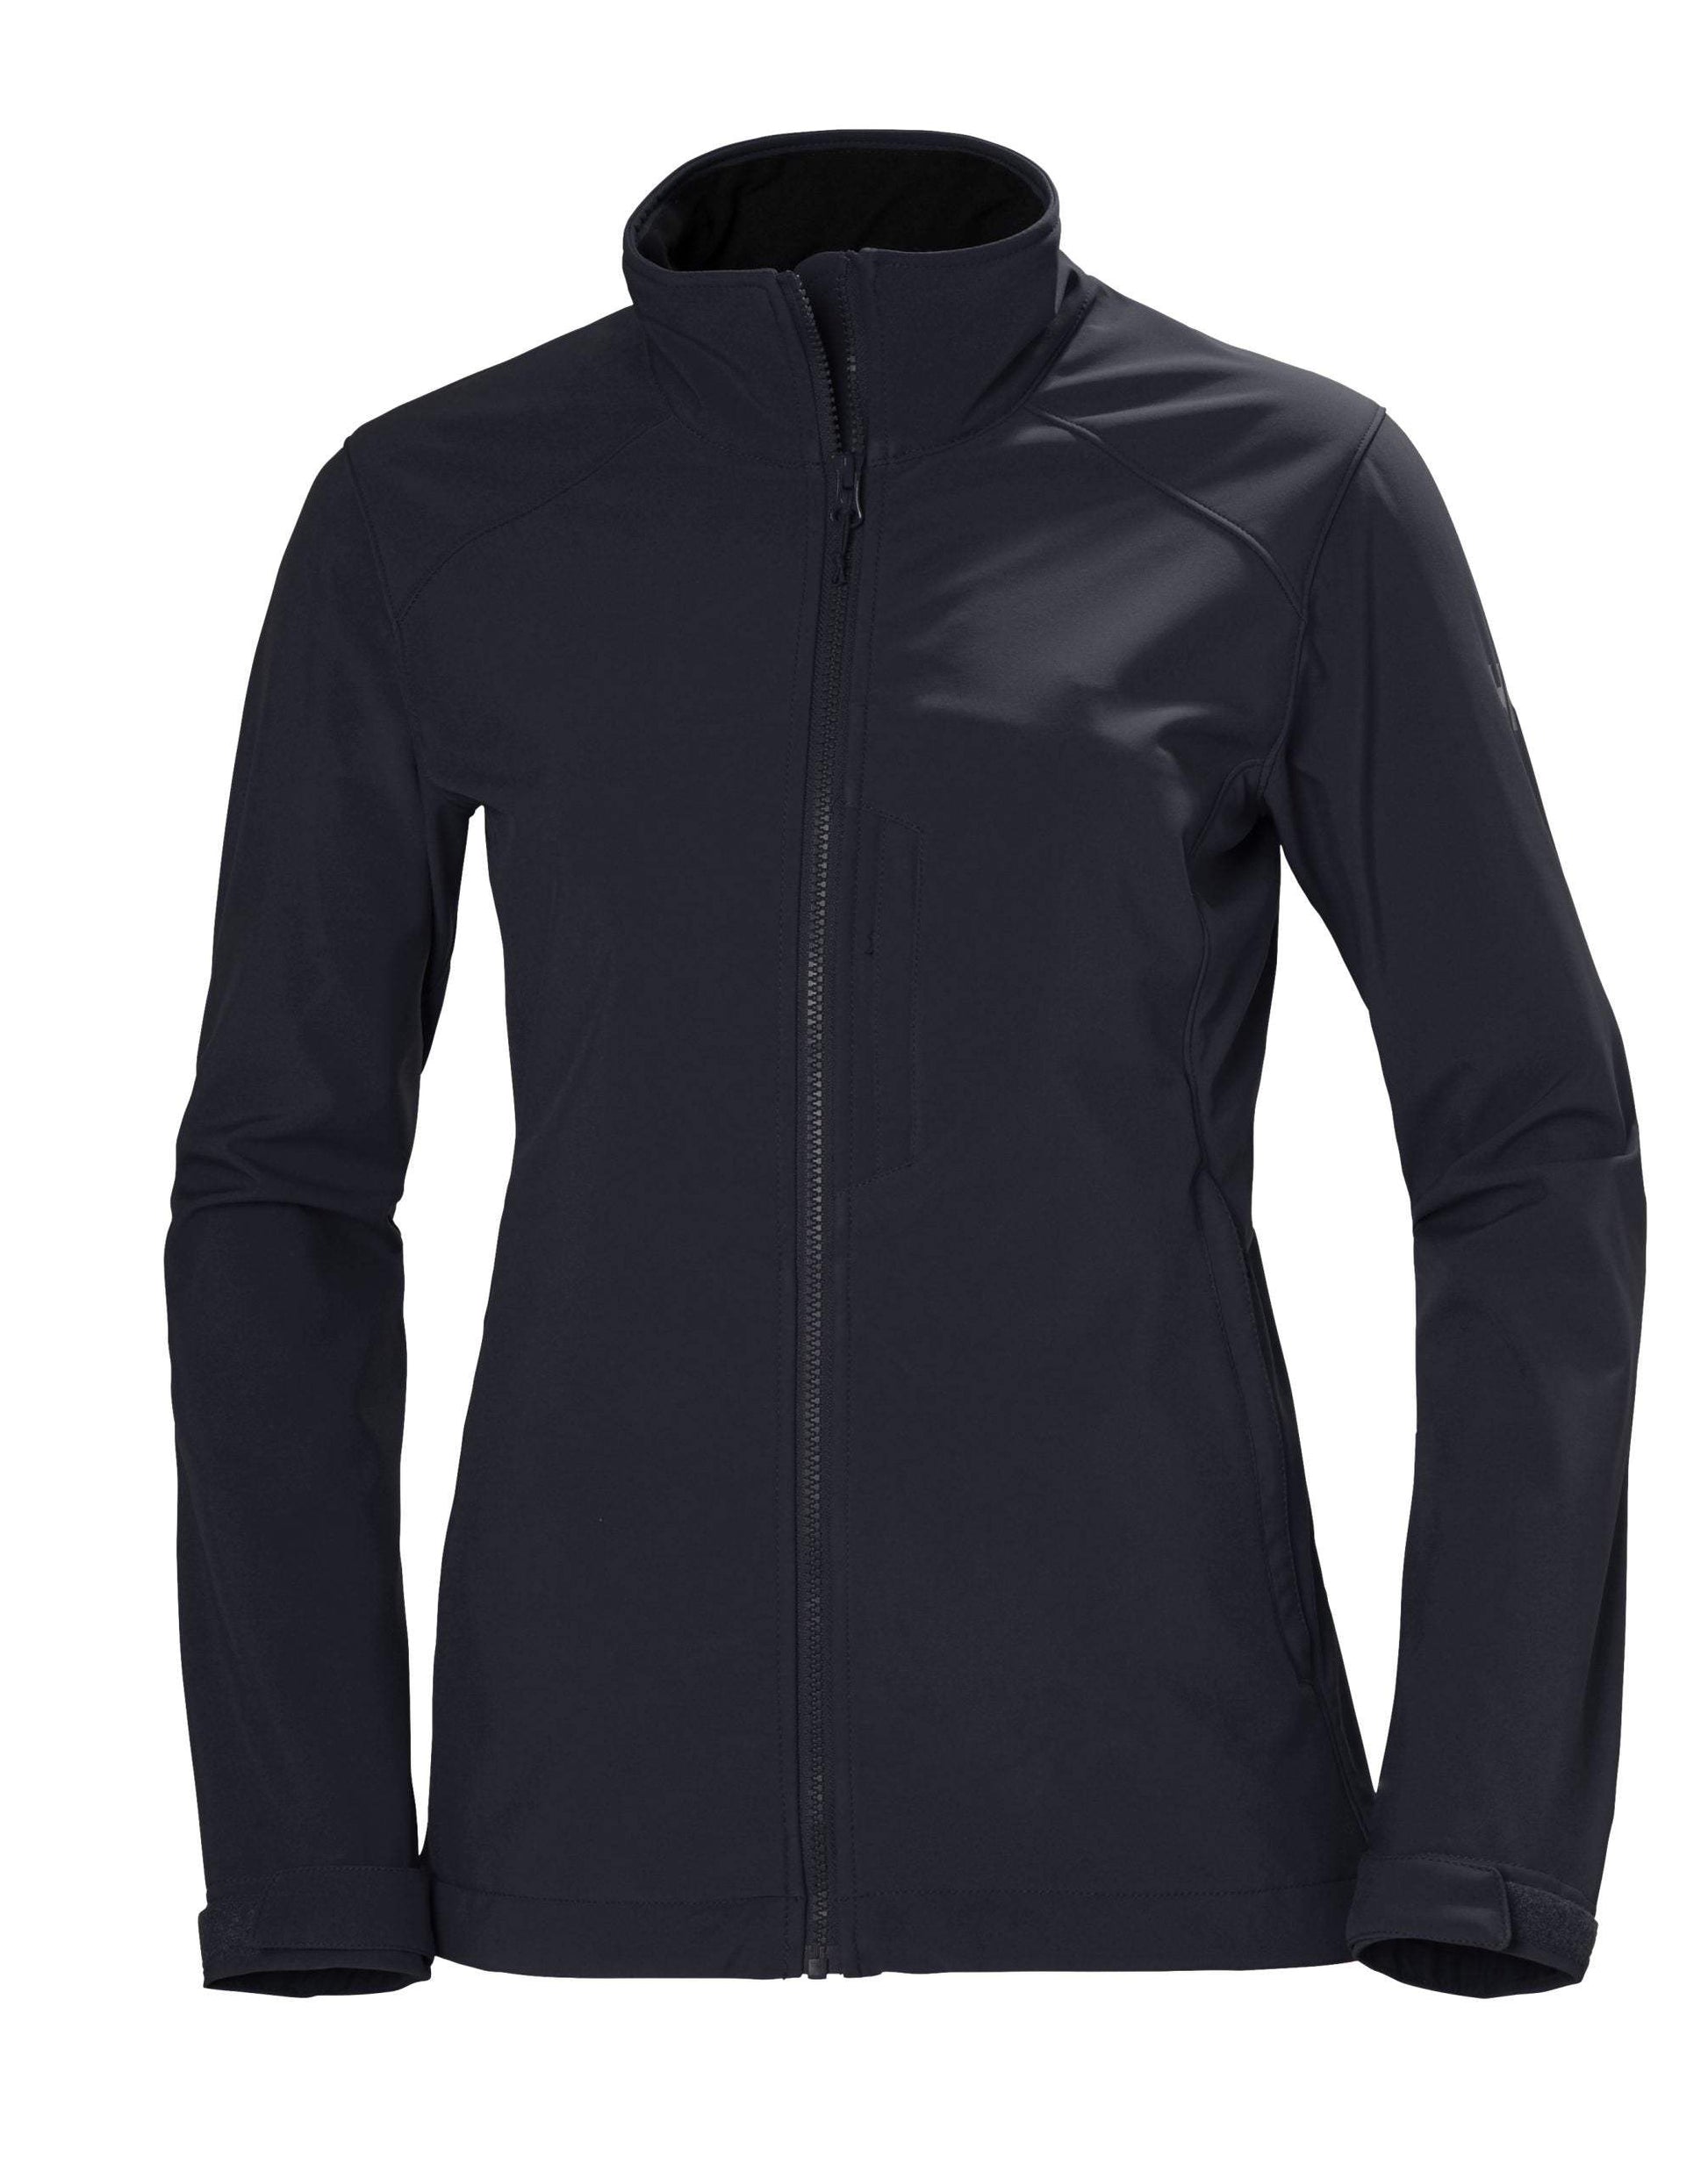 Women's Paramount Softshell Jacket by Helly Hansen - The Luxury Promotional Gifts Company Limited